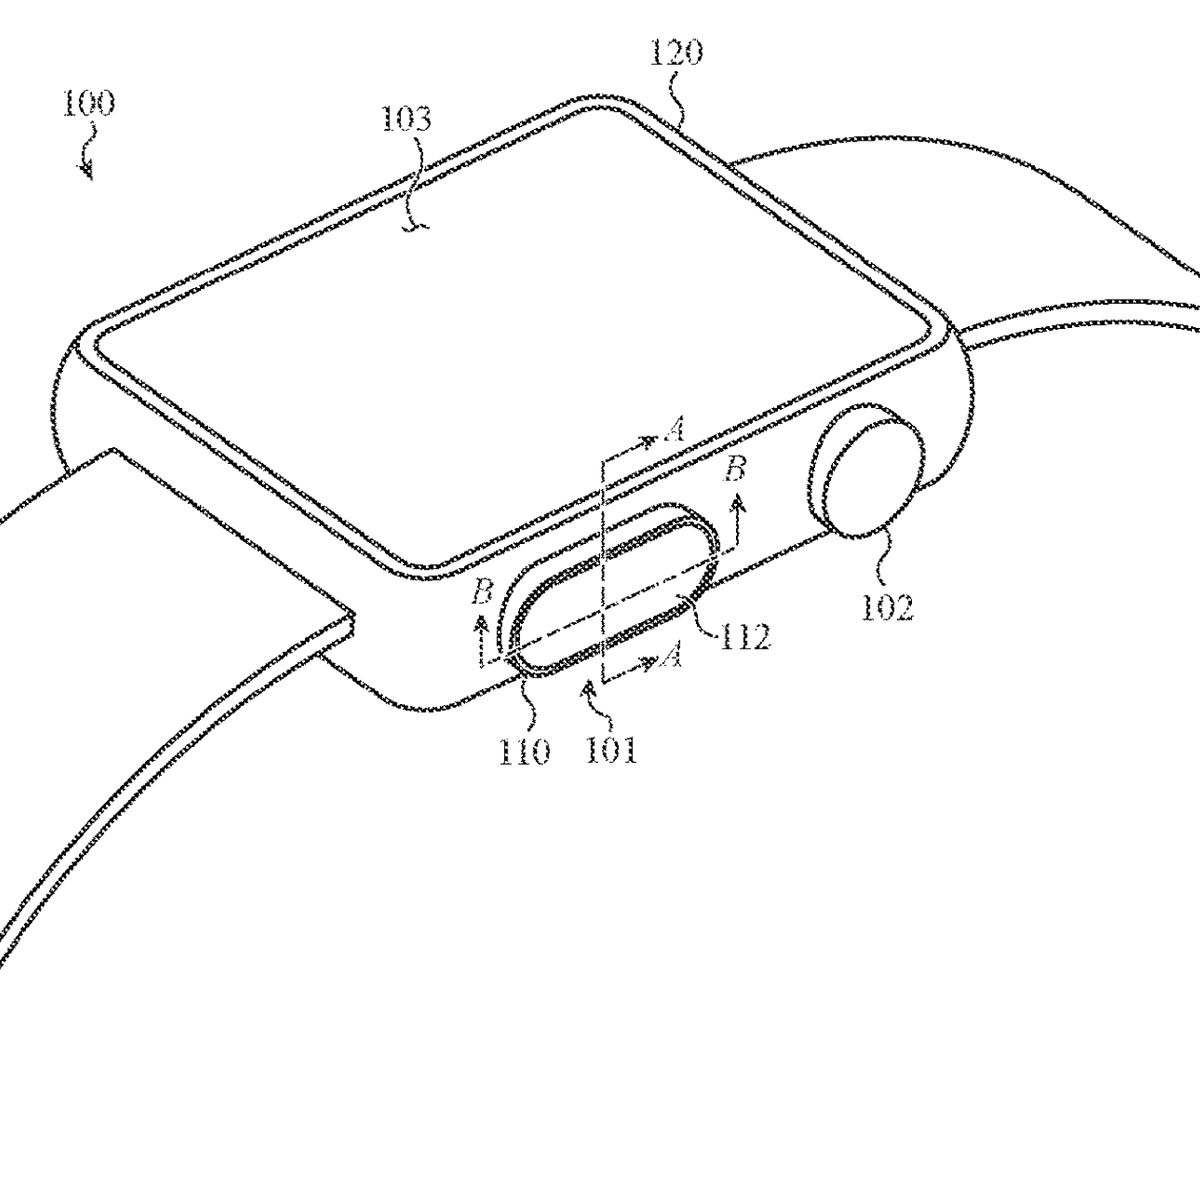 Future Apple Watch Could Gain Touch ID and Under-Display Camera - MacRumors